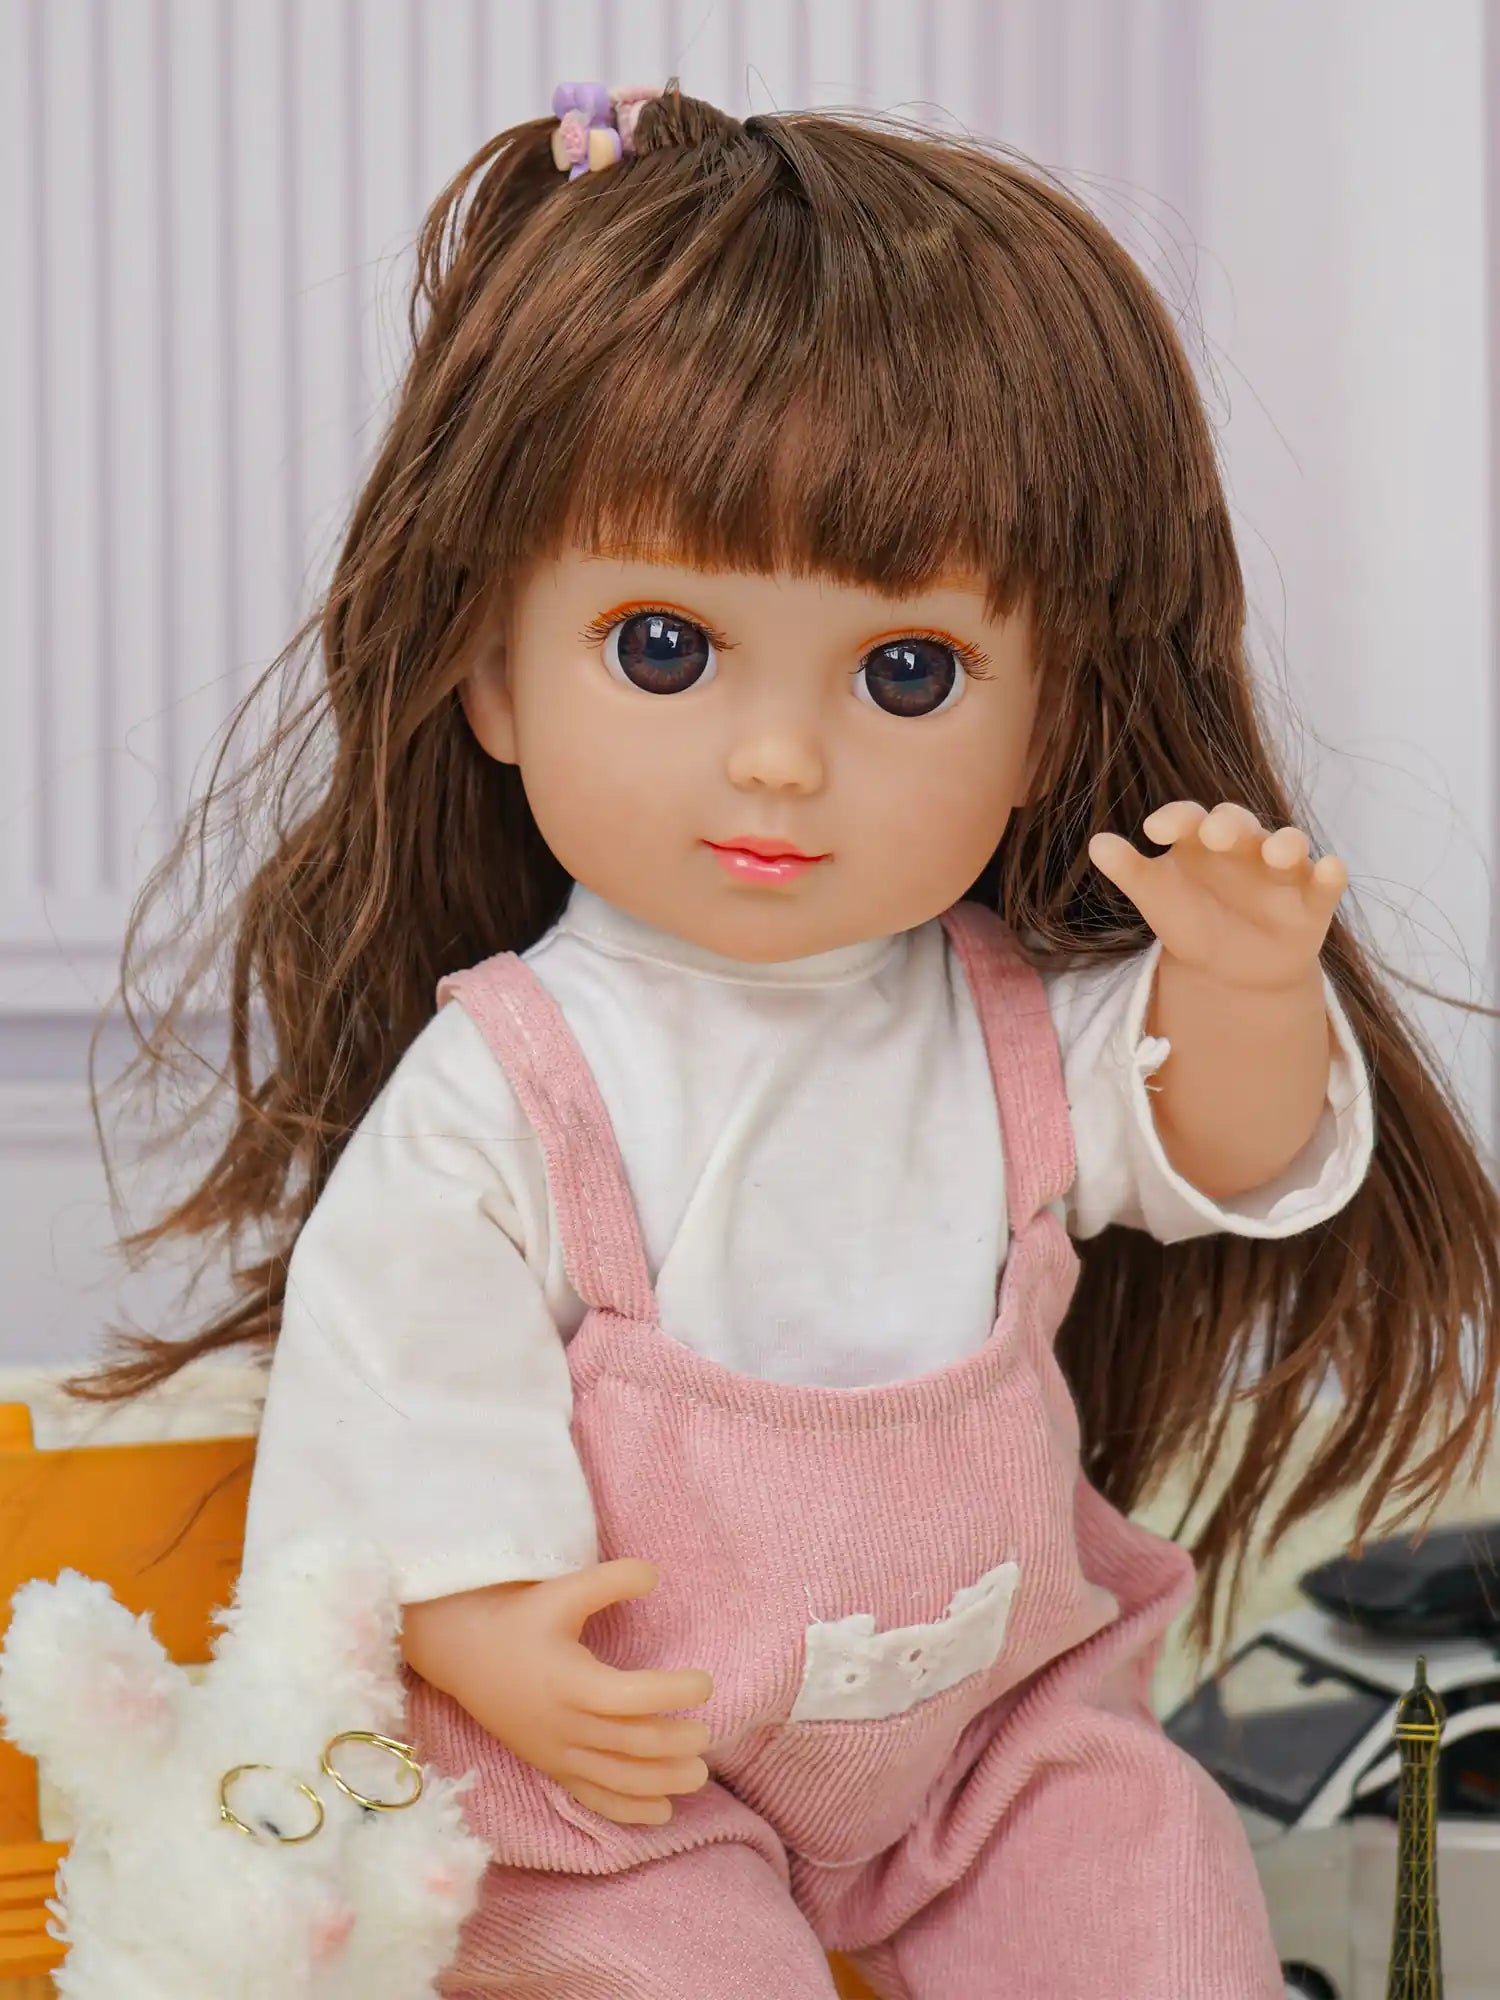 Doll with brunette ponytail, pink overalls, plush dog, and Eiffel Tower figurine.